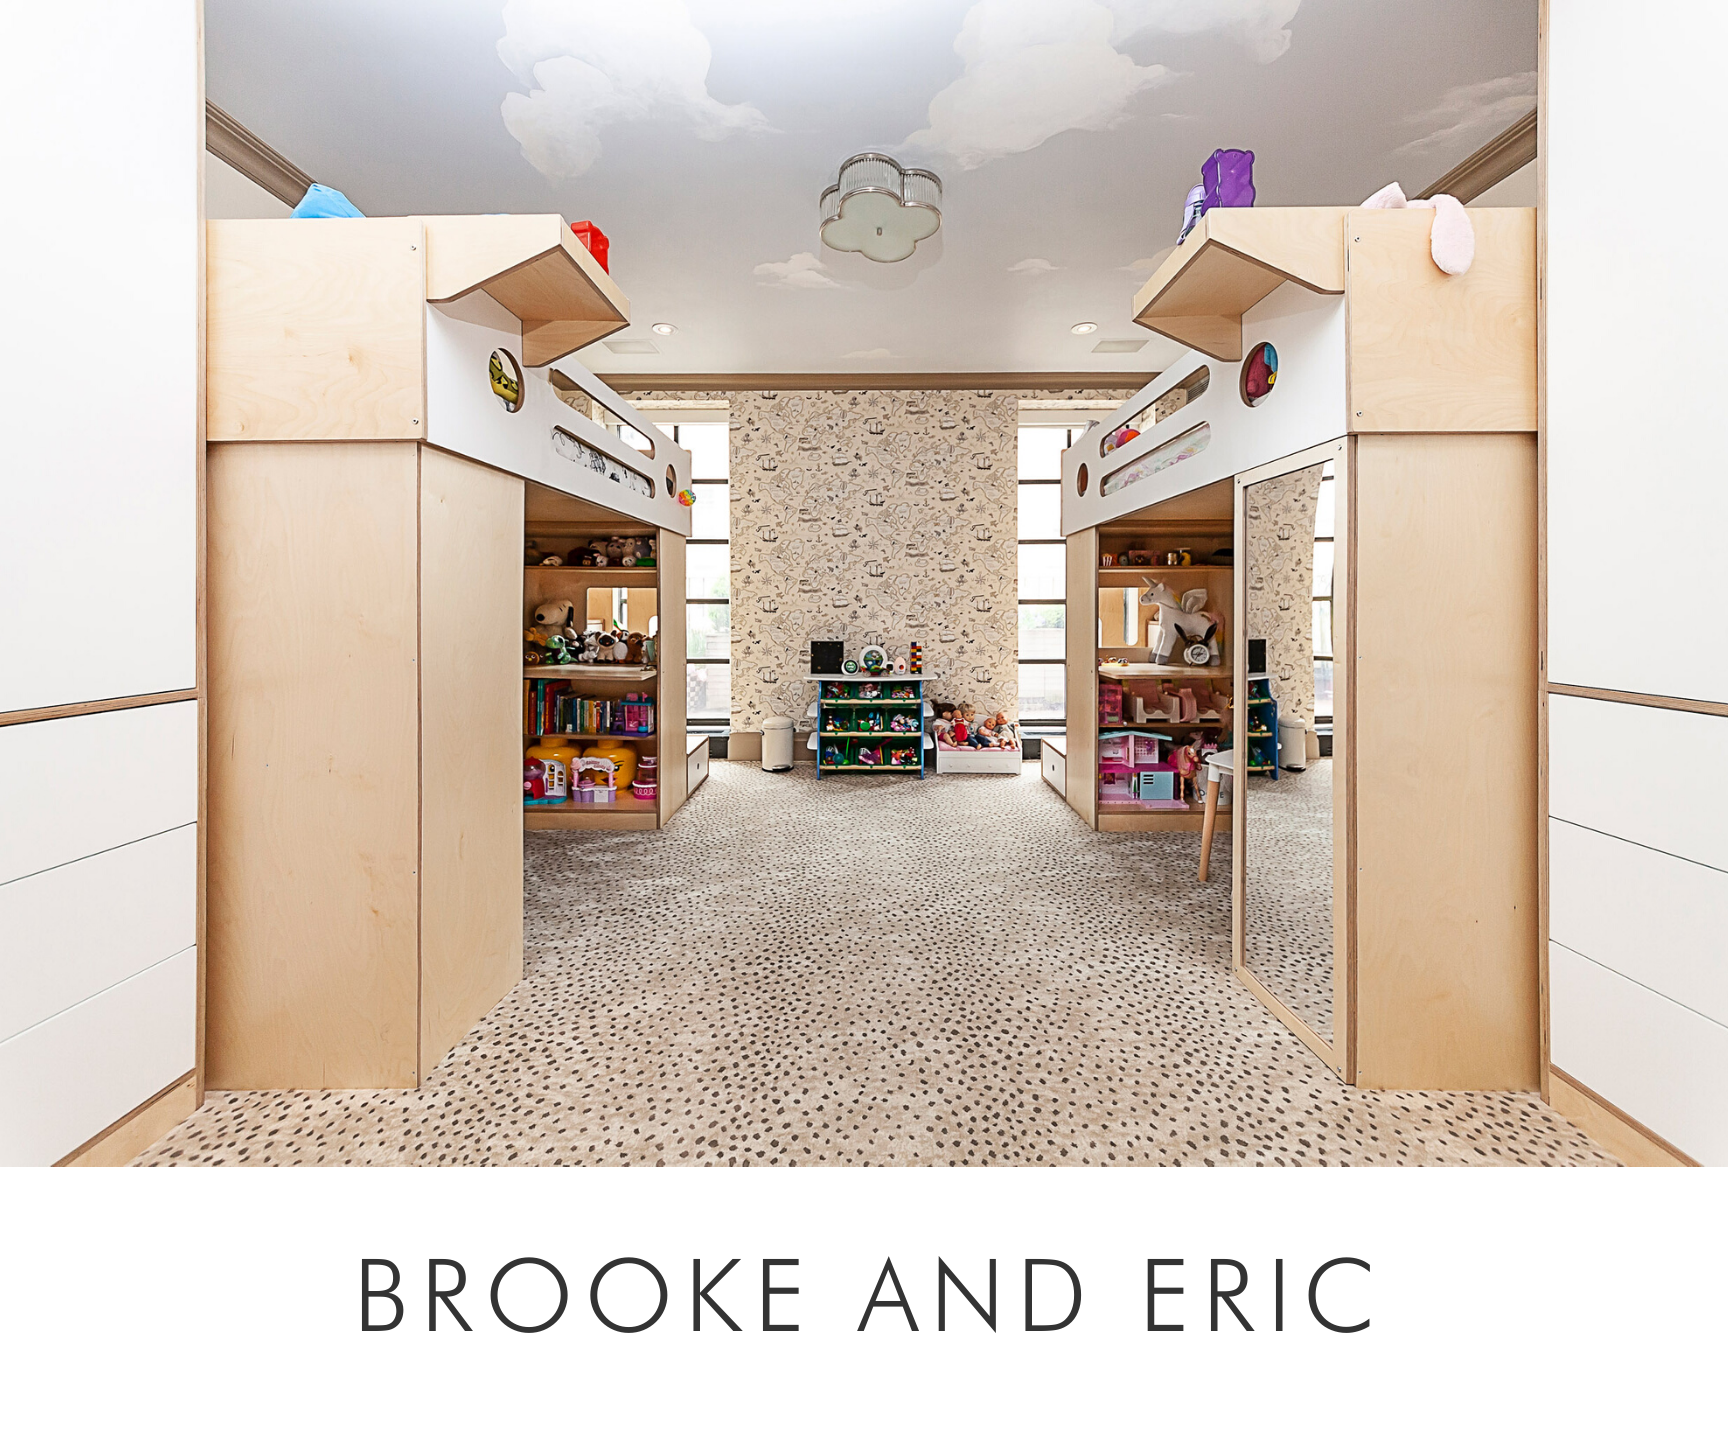 Brooke and eric room spacious play area with two loft entrances, textured carpet, and shelves filled with toys.